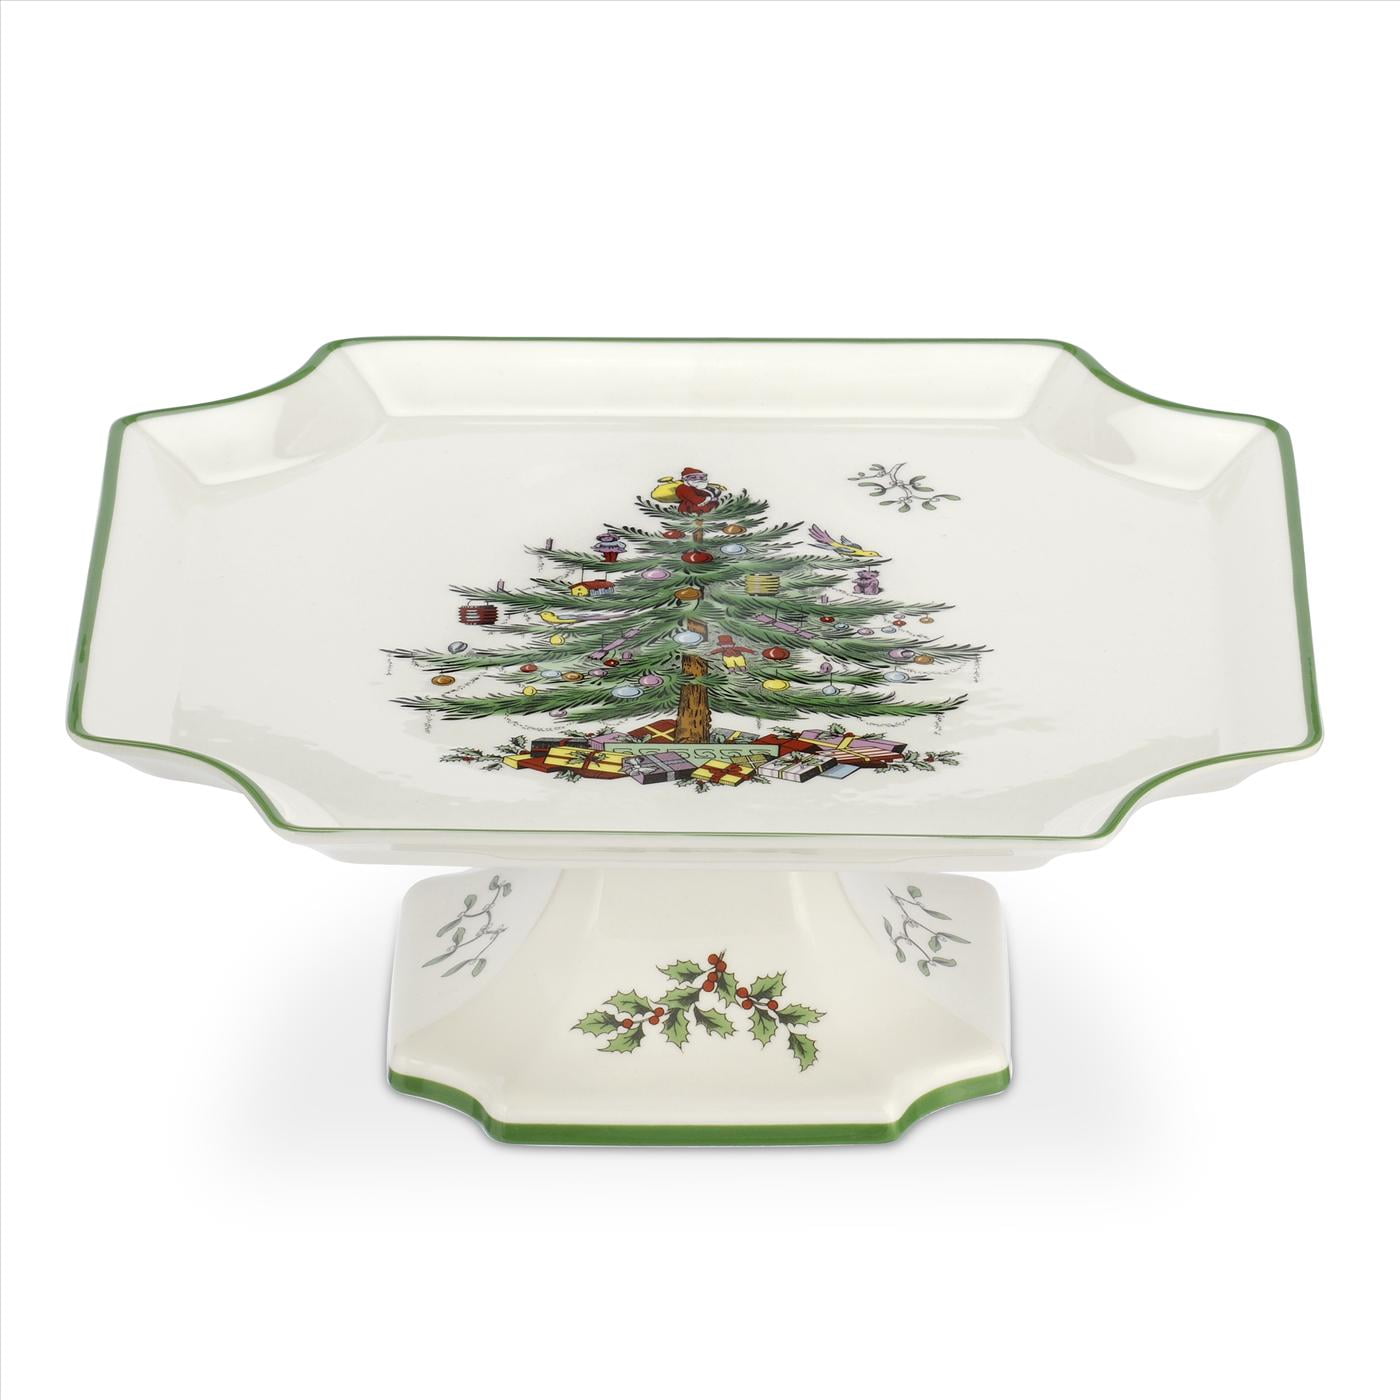  Spode Christmas Tree Square Baker, 10 Inch Baking Dish for  Serving Lasagna, Casserole, and Vegetables, Made from Fine Porcelain